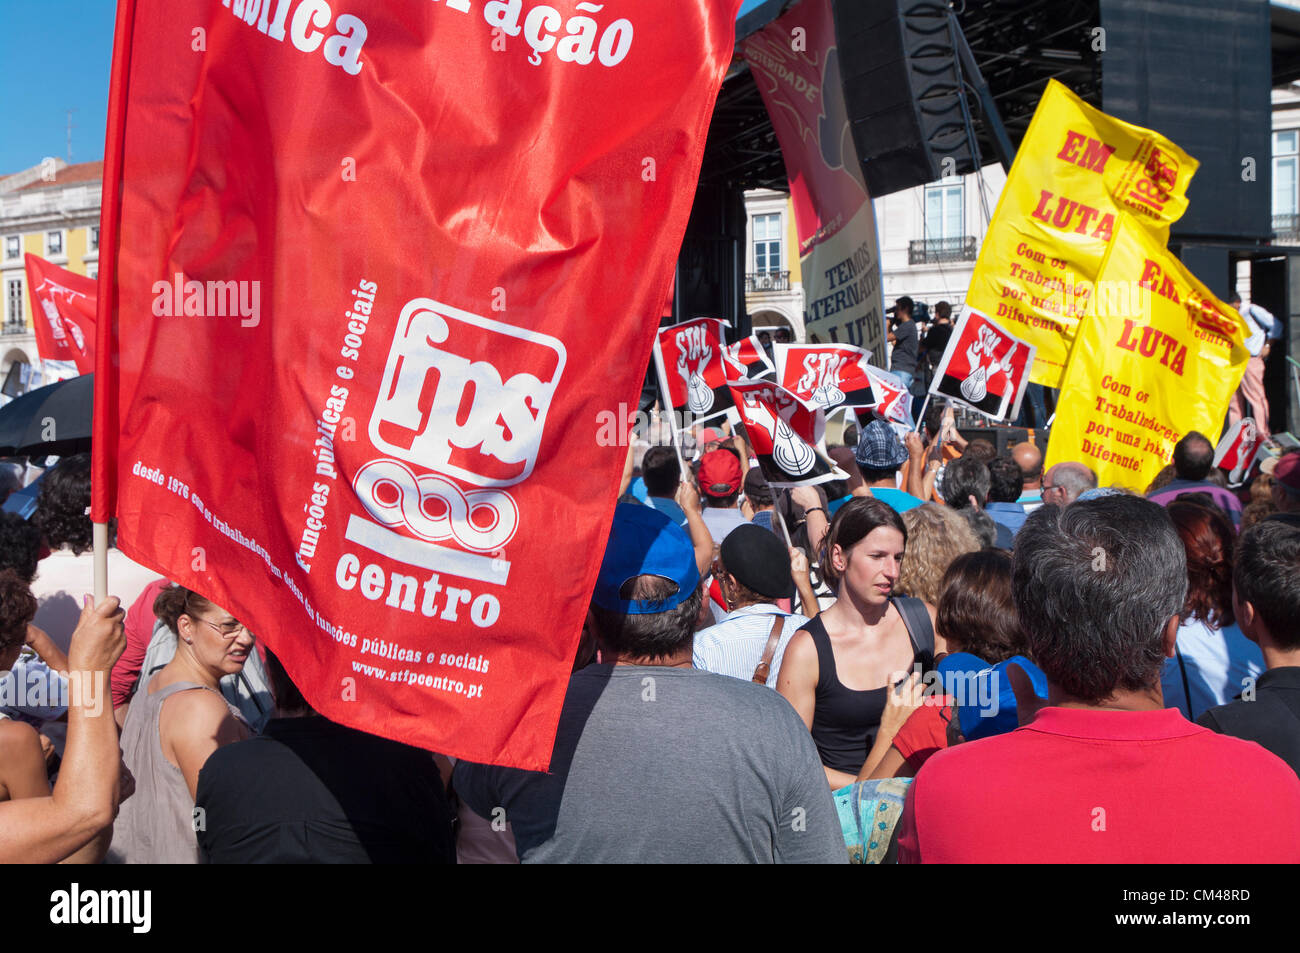 Peaceful protest organised by the CGTP union gathers activists in Lisbon on Saturday against austerity, poverty and new taxes. Stock Photo